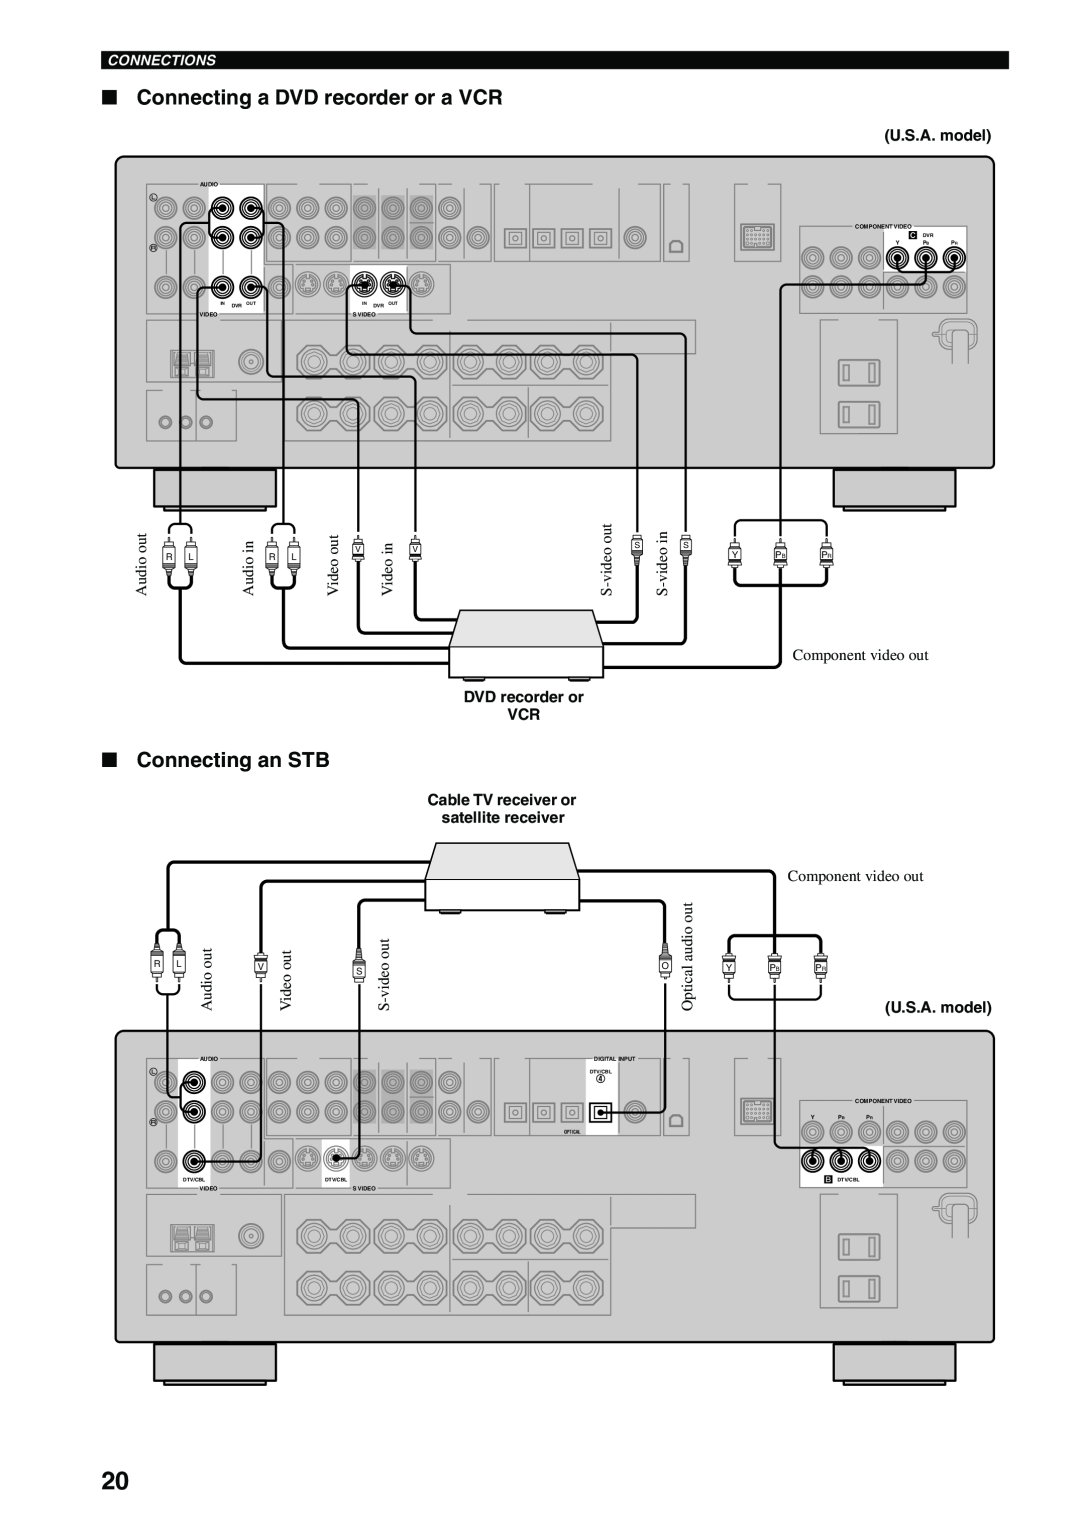 Yamaha RX-V559 owner manual Connecting a DVD recorder or a VCR, Connecting an STB, U.S.A. model, DVD recorder or VCR 